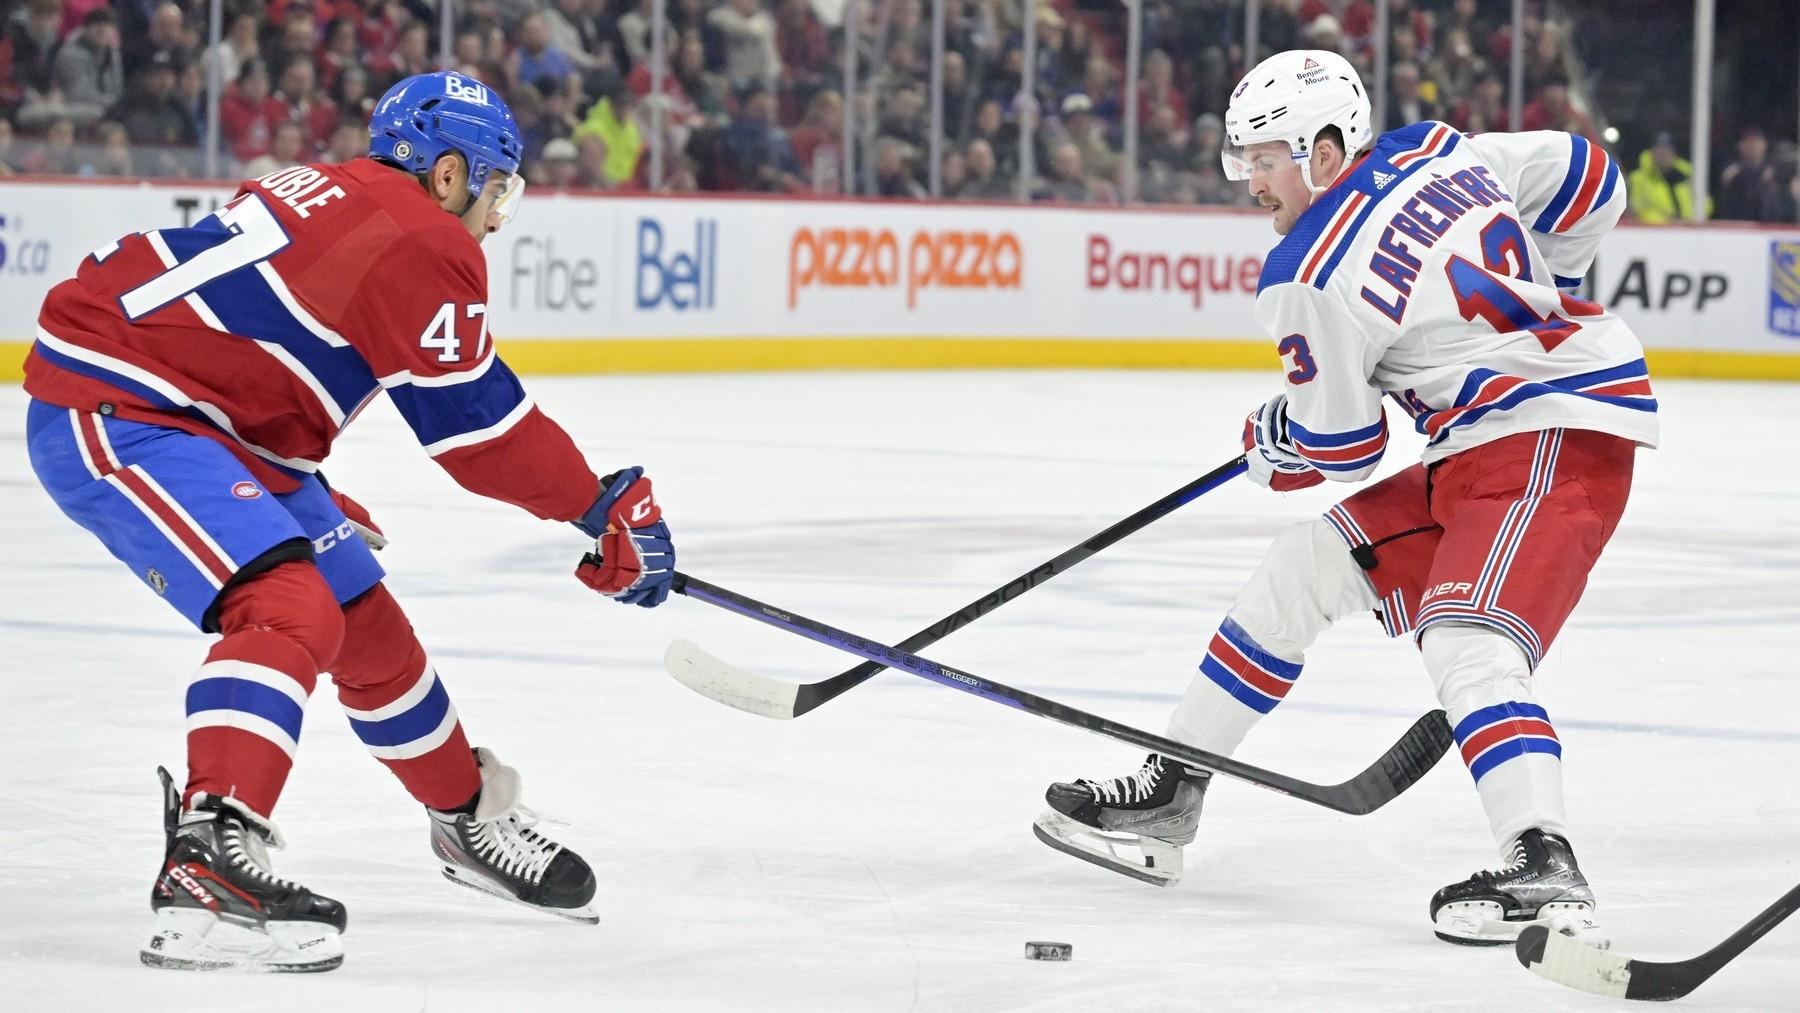 New York Rangers forward Alexis Lafreniere (13) plays the puck and Montreal Canadiens defenseman Jayden Struble (47) defends during the first period at the Bell Centre. / Eric Bolte-USA TODAY Sports